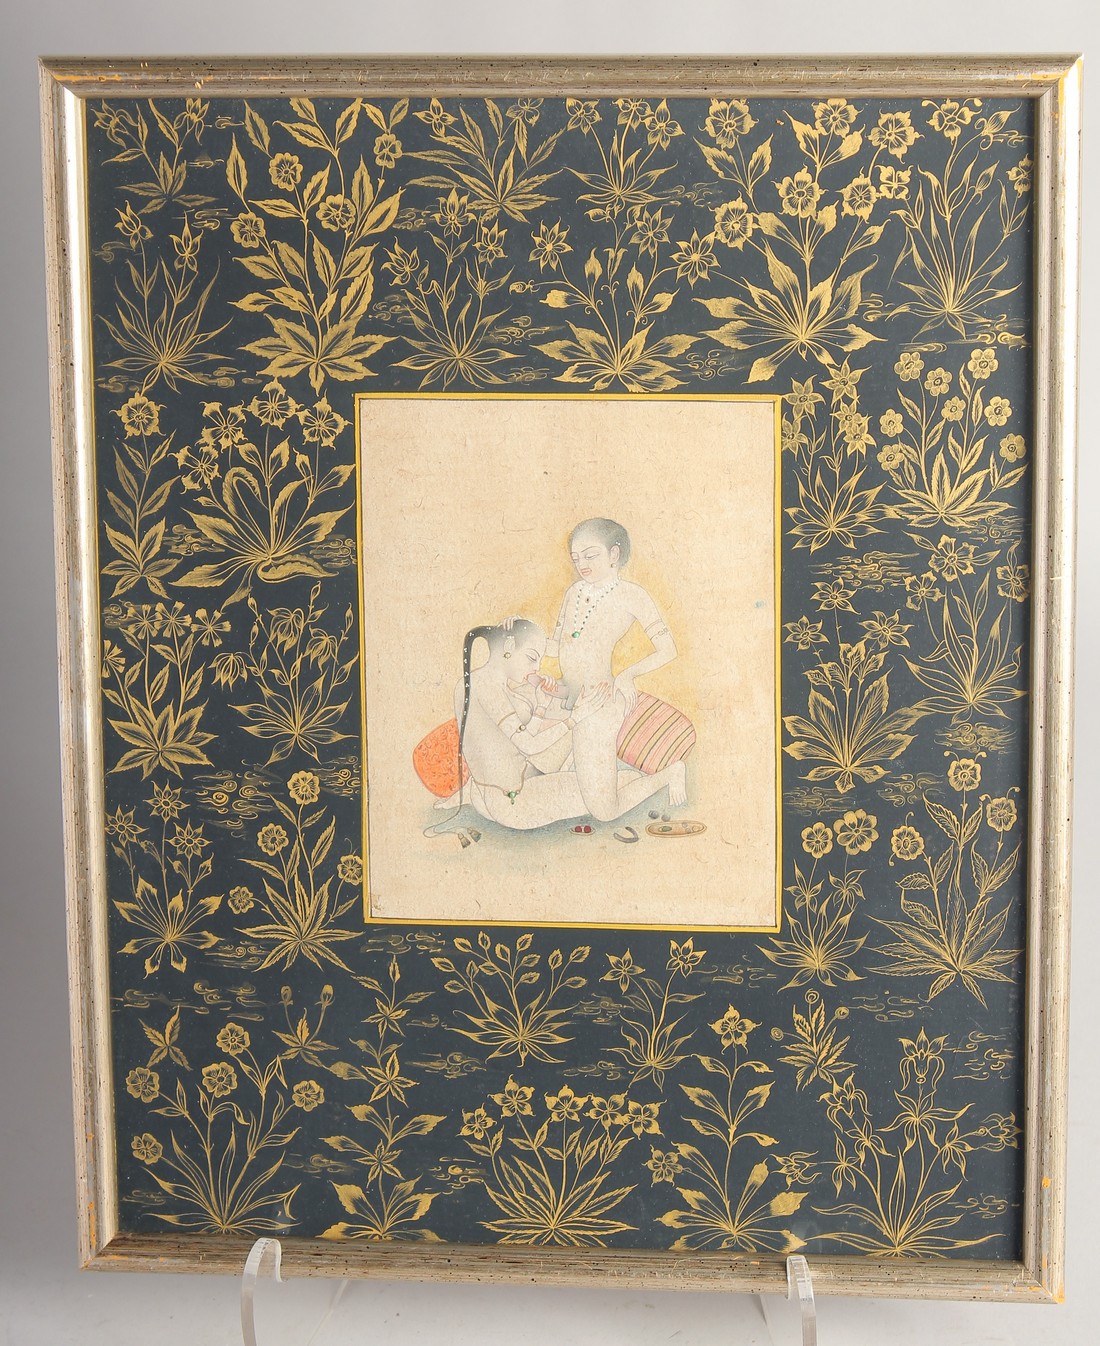 A FINE QUALITY 19TH CENTURY MUGHAL INDIAN EROTIC PAINTING, depicting an intimate male and female, - Image 2 of 3